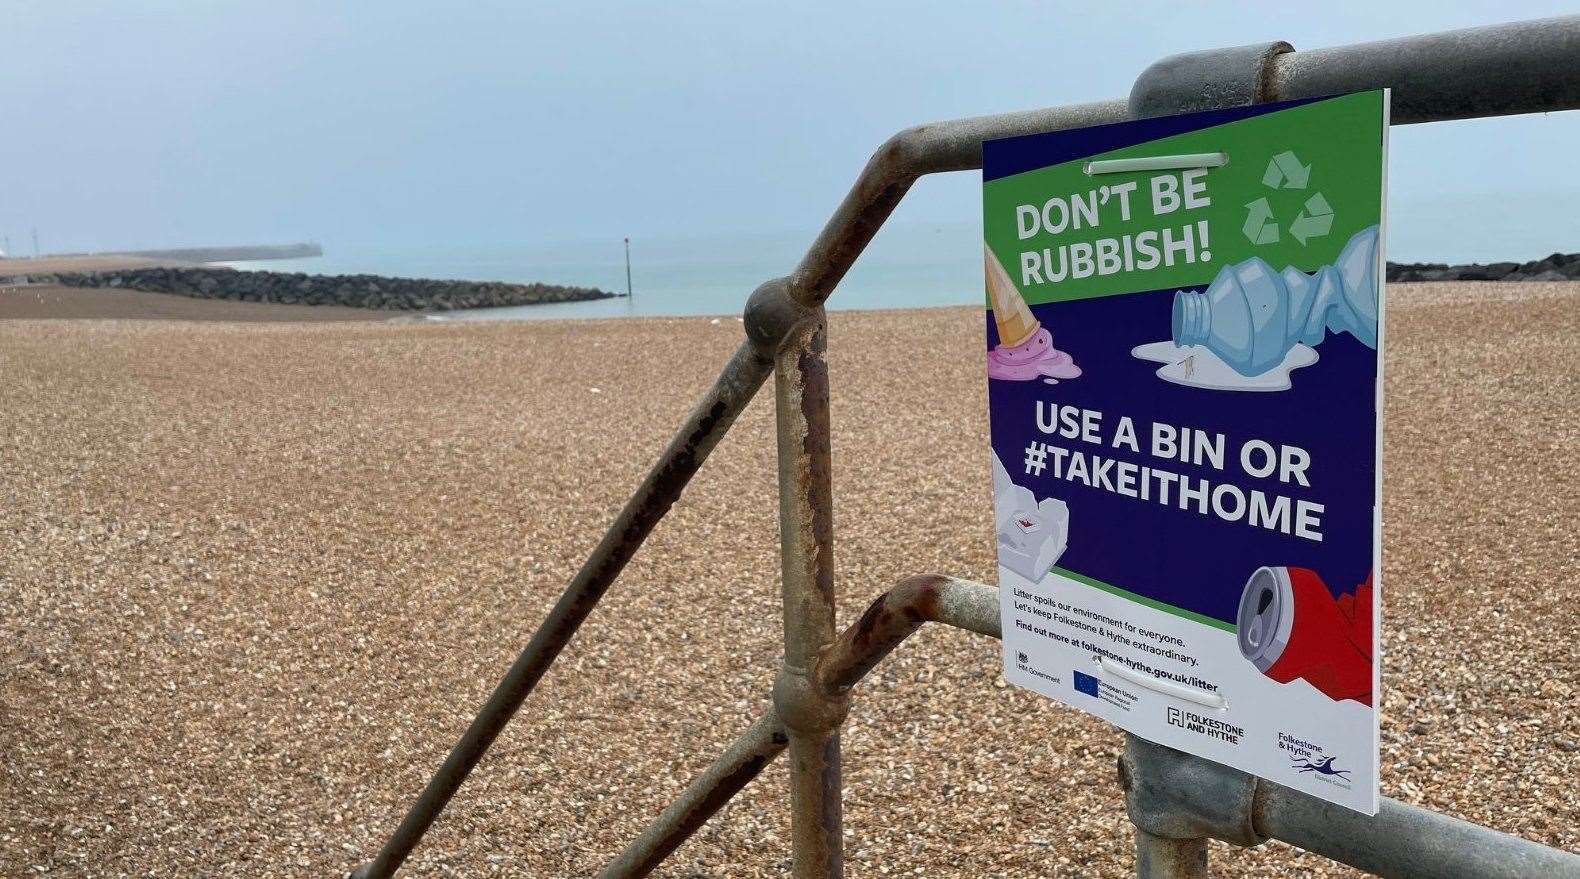 Folkestone and Hythe District Council is warning people to take their rubbish home. Photo: FHDC